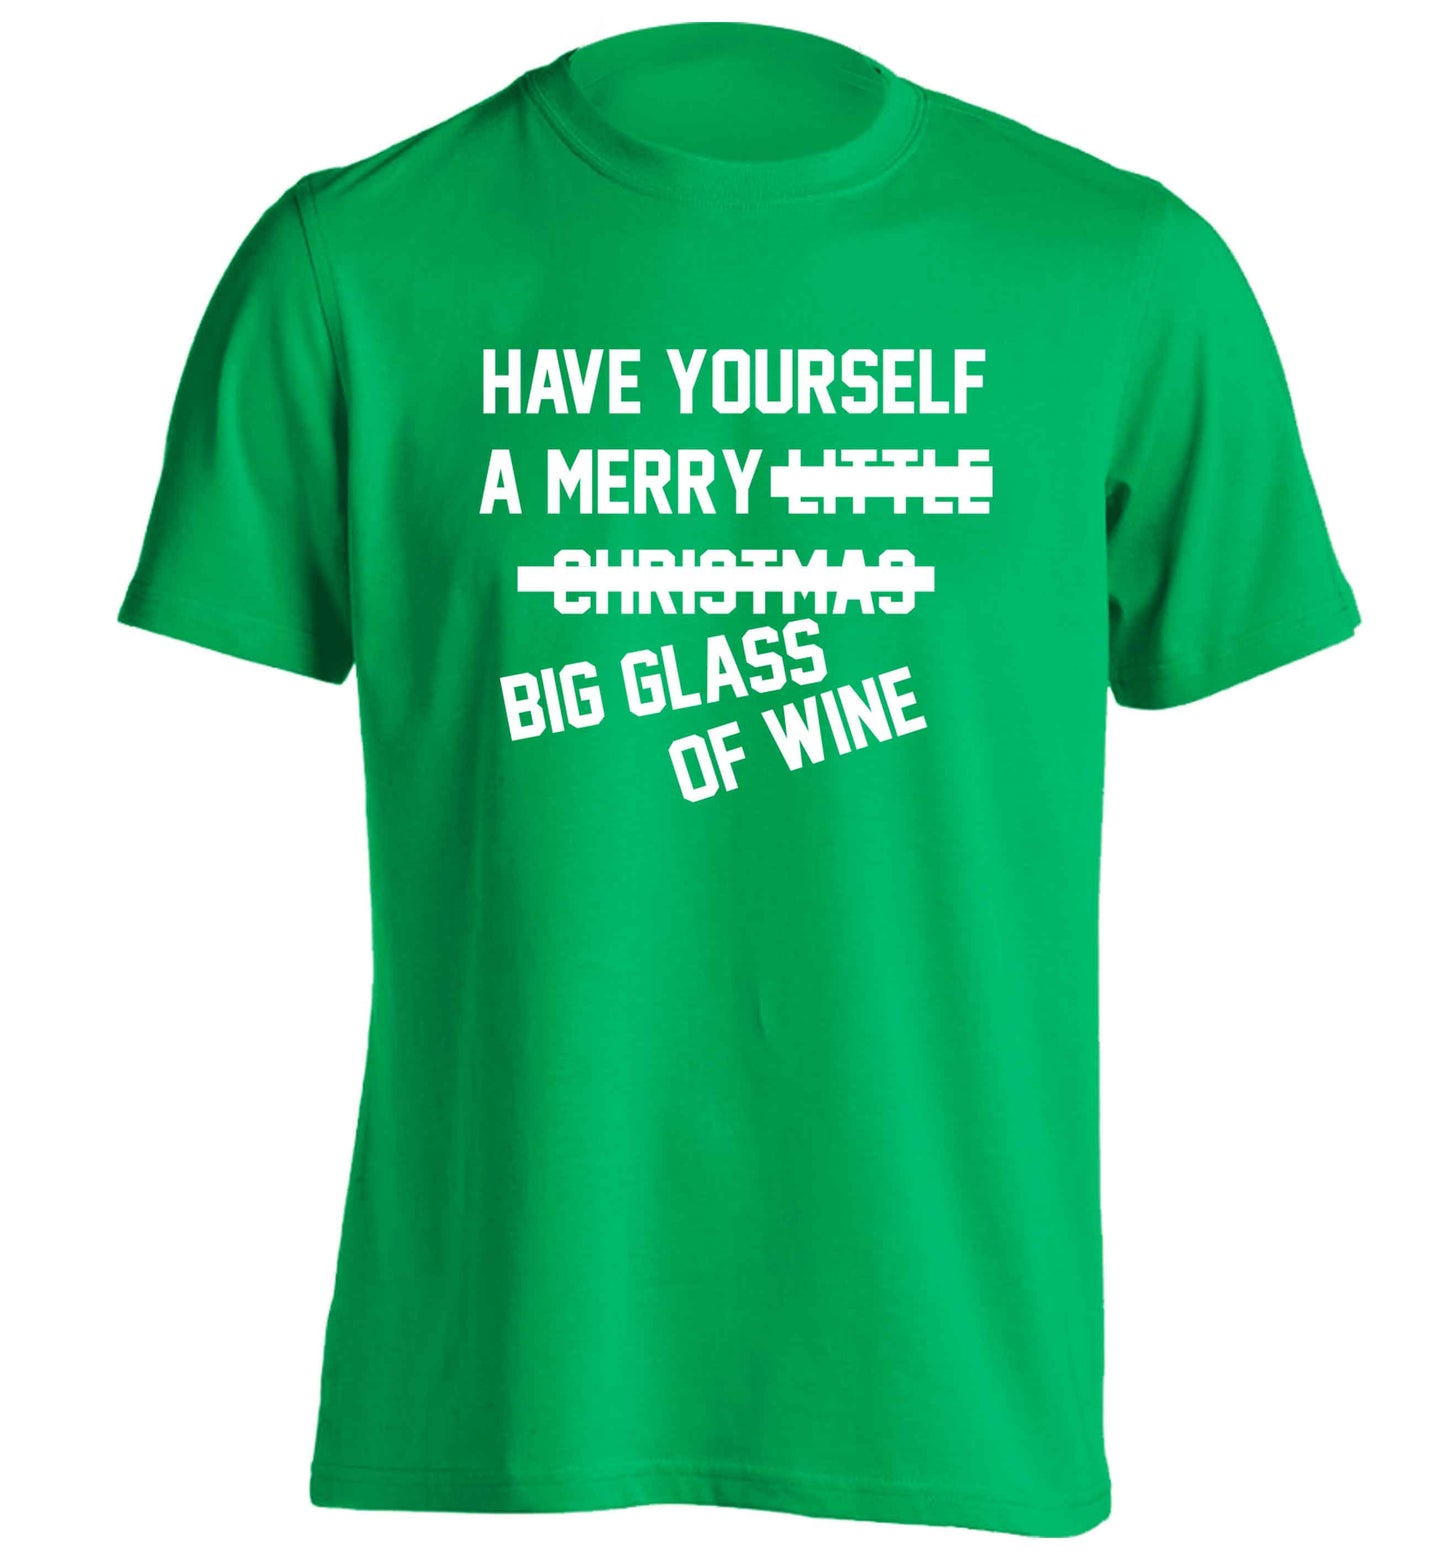 Have yourself a merry big glass of wine adults unisex green Tshirt 2XL